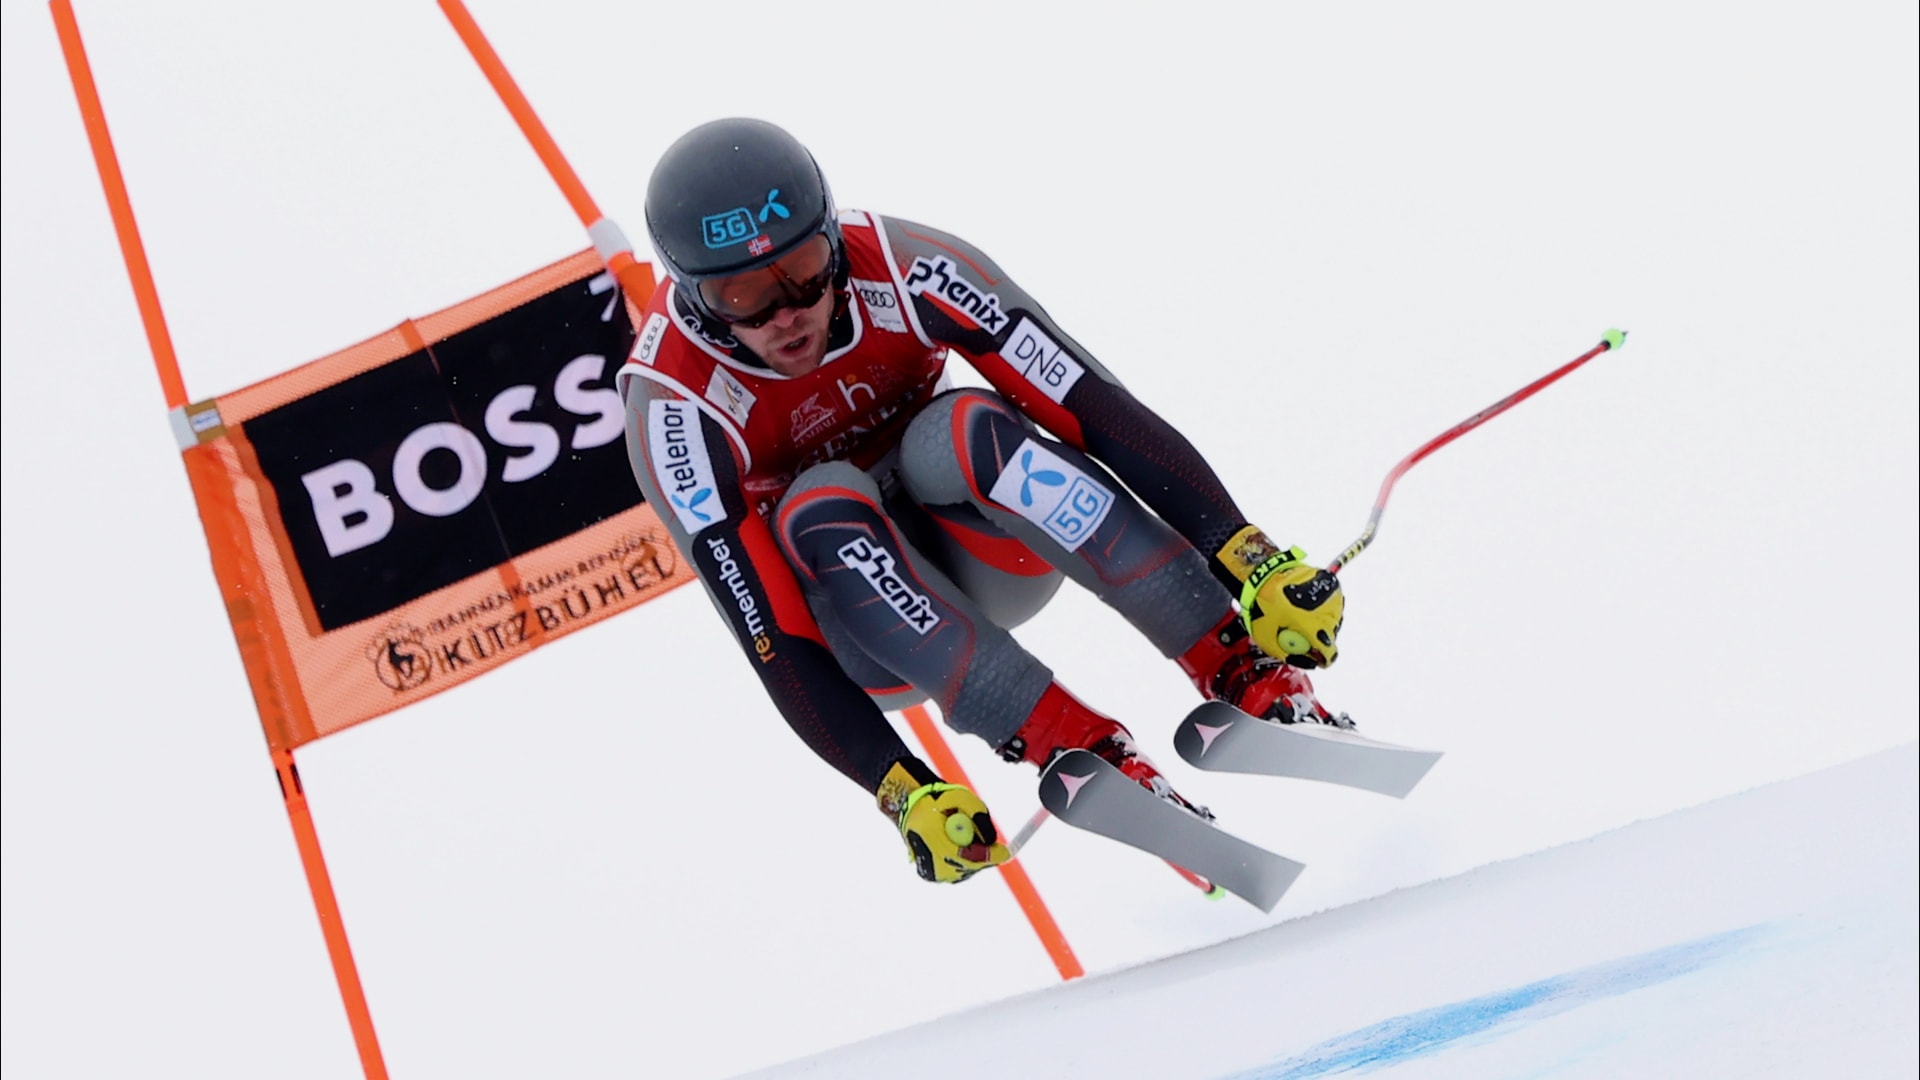 Live streaming, mens downhill at 2023 FIS Alpine Ski World Championships on 12 February Preview, schedule and how to watch